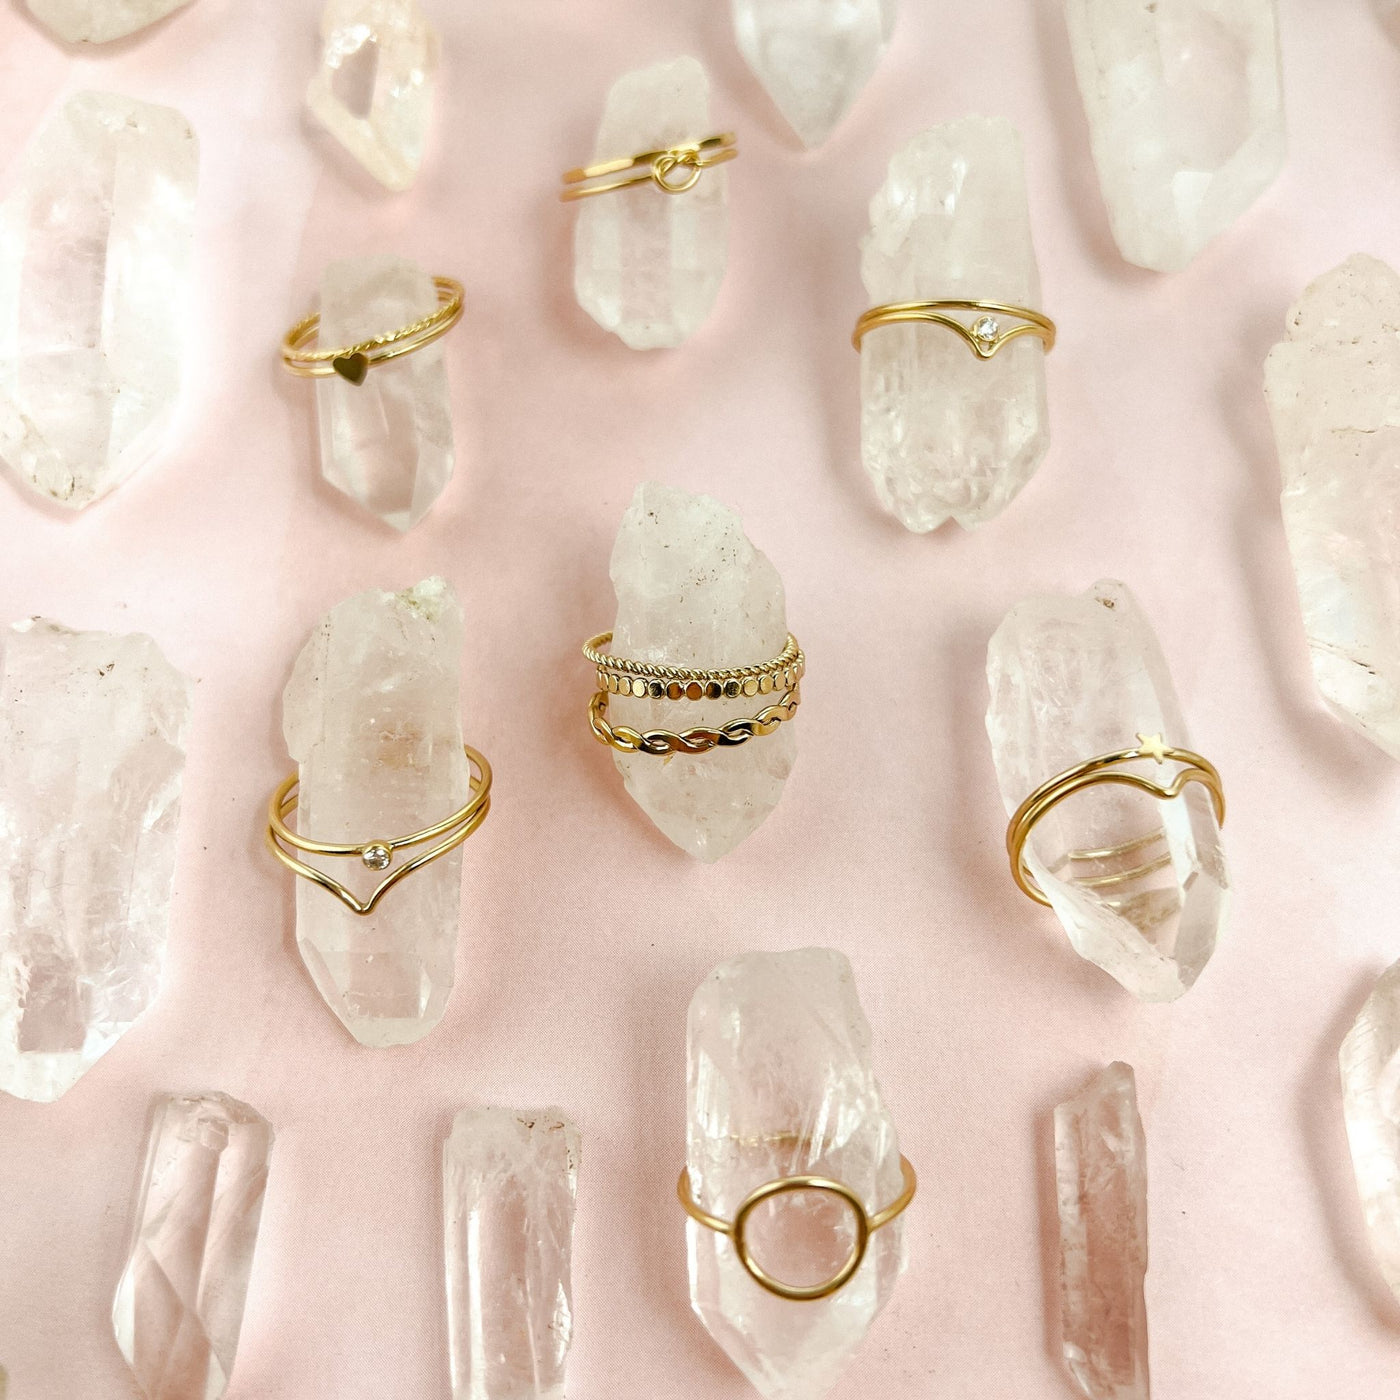 Assortment of differing styles of minimalist and dainty women’s stacking rings displayed on several quarts crystal points